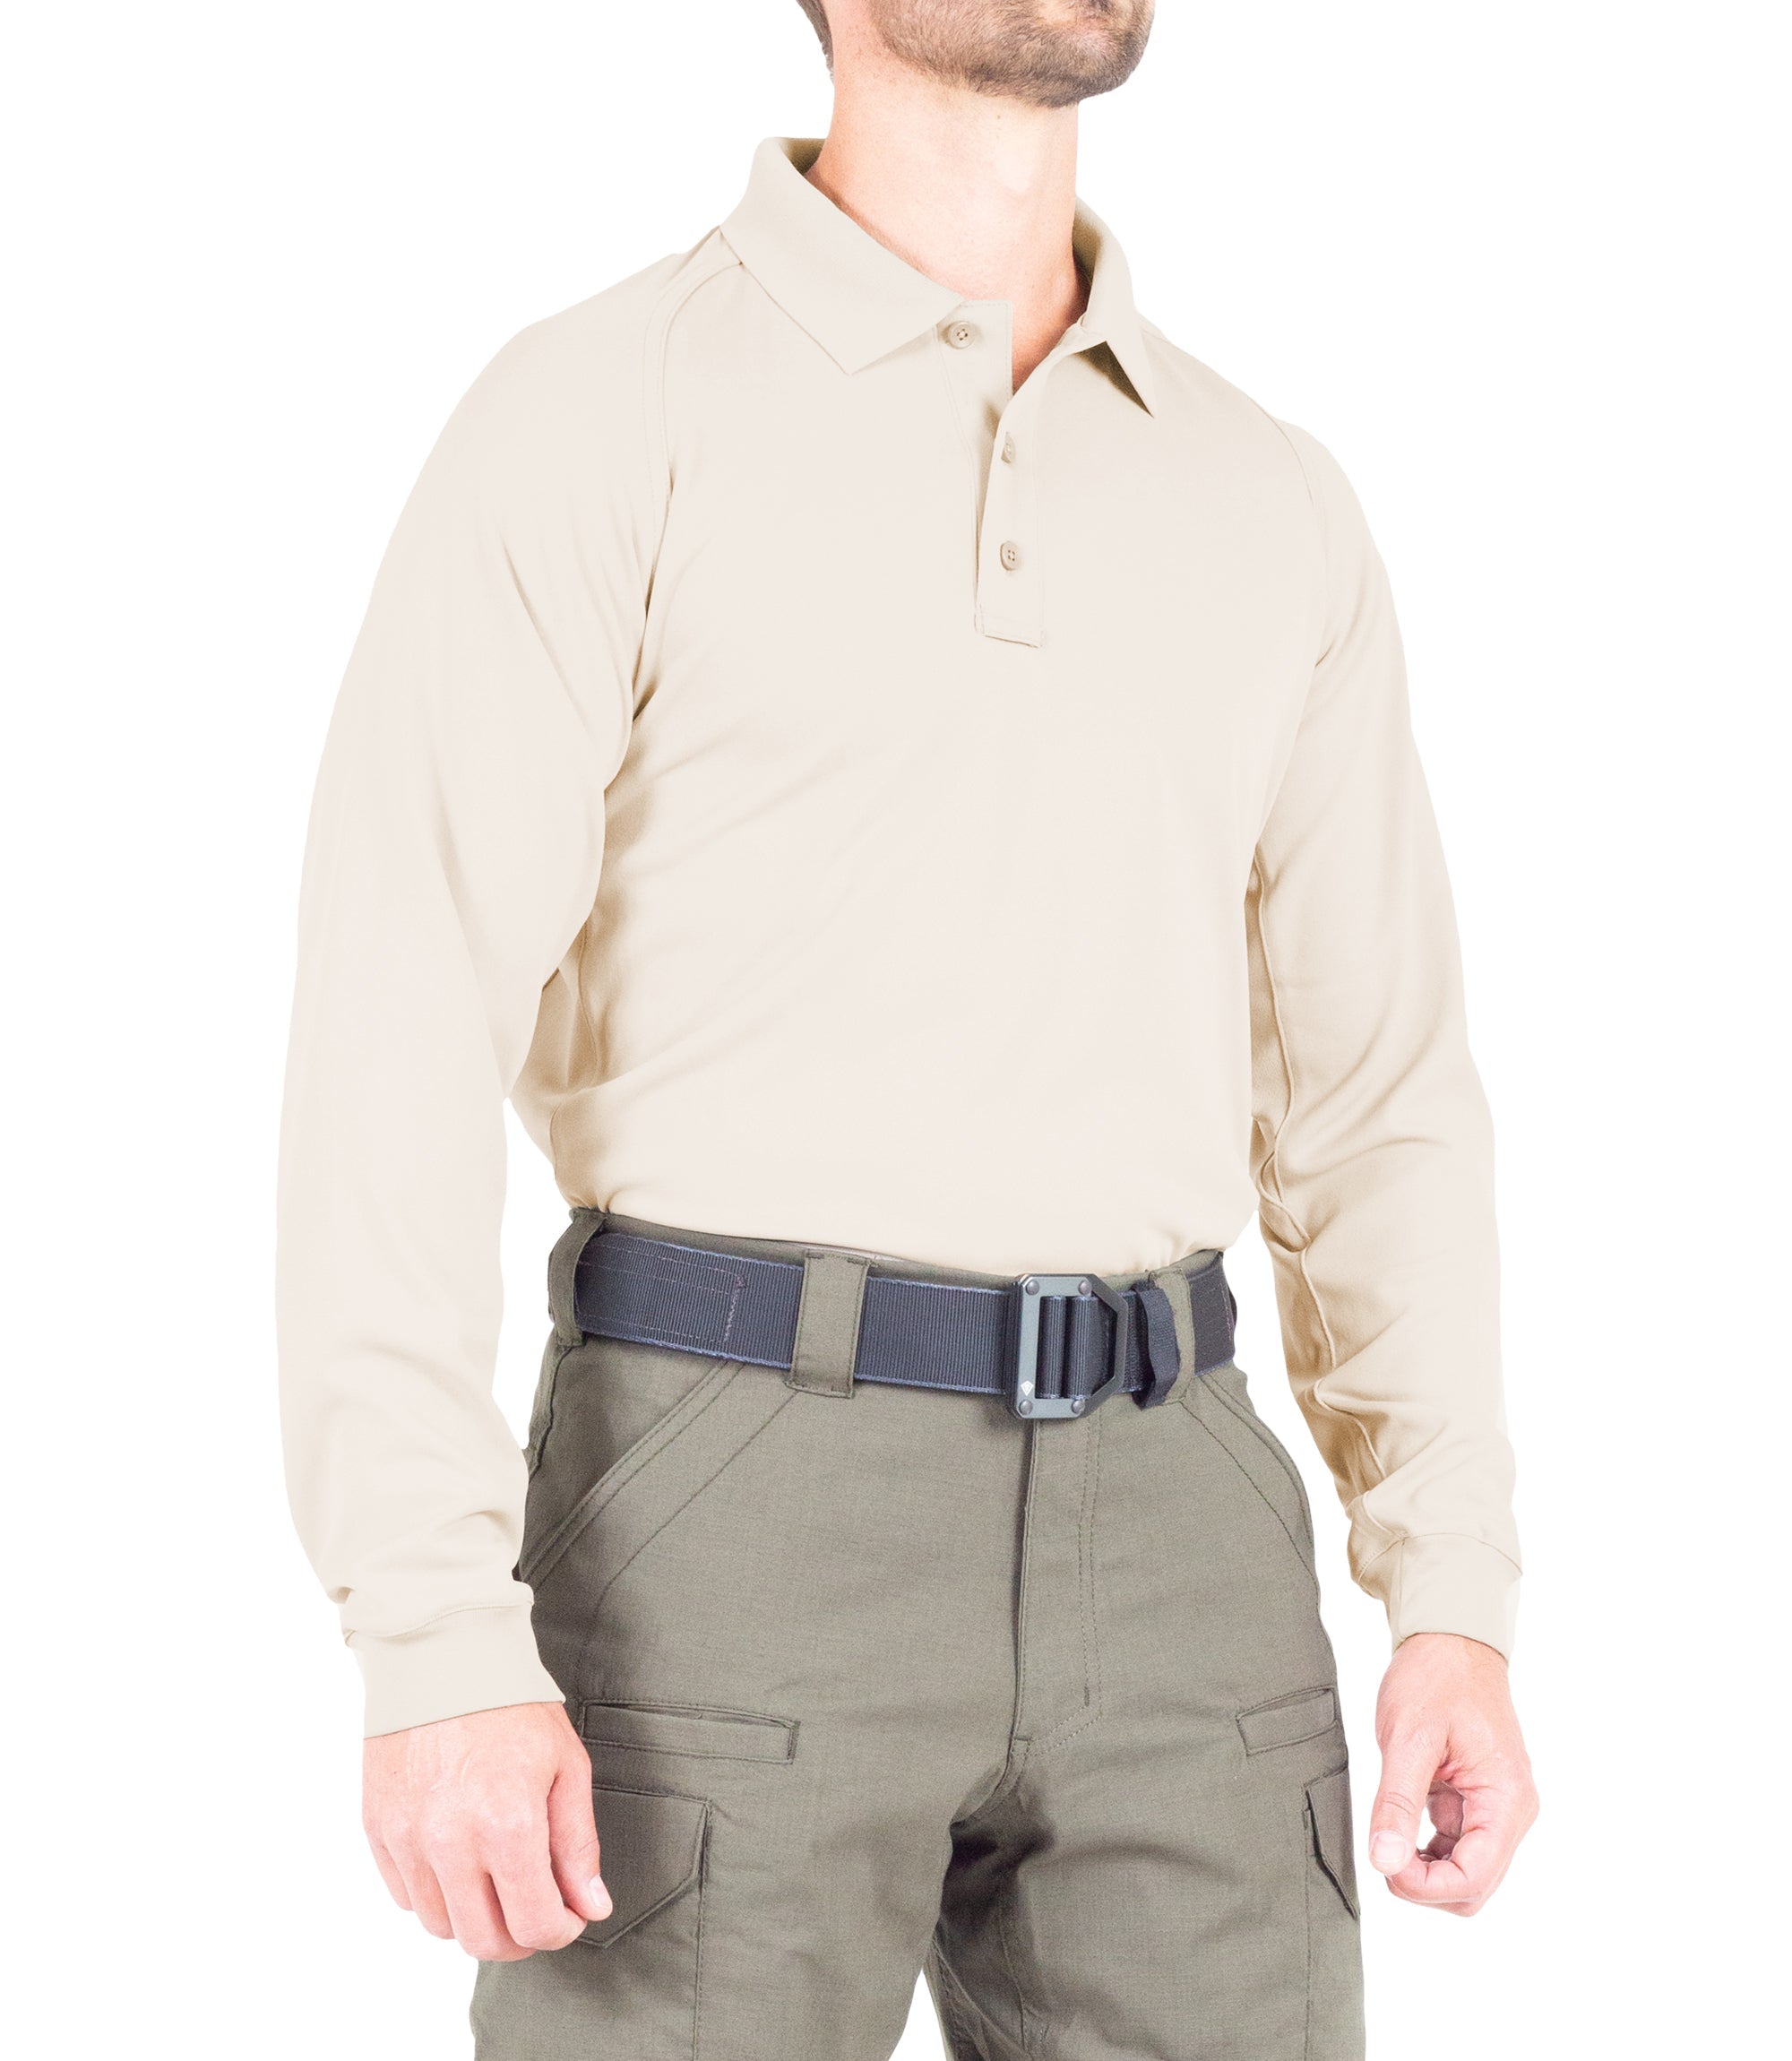 First Tactical - Men's Performance Long Sleeve Polo / Silver Tan